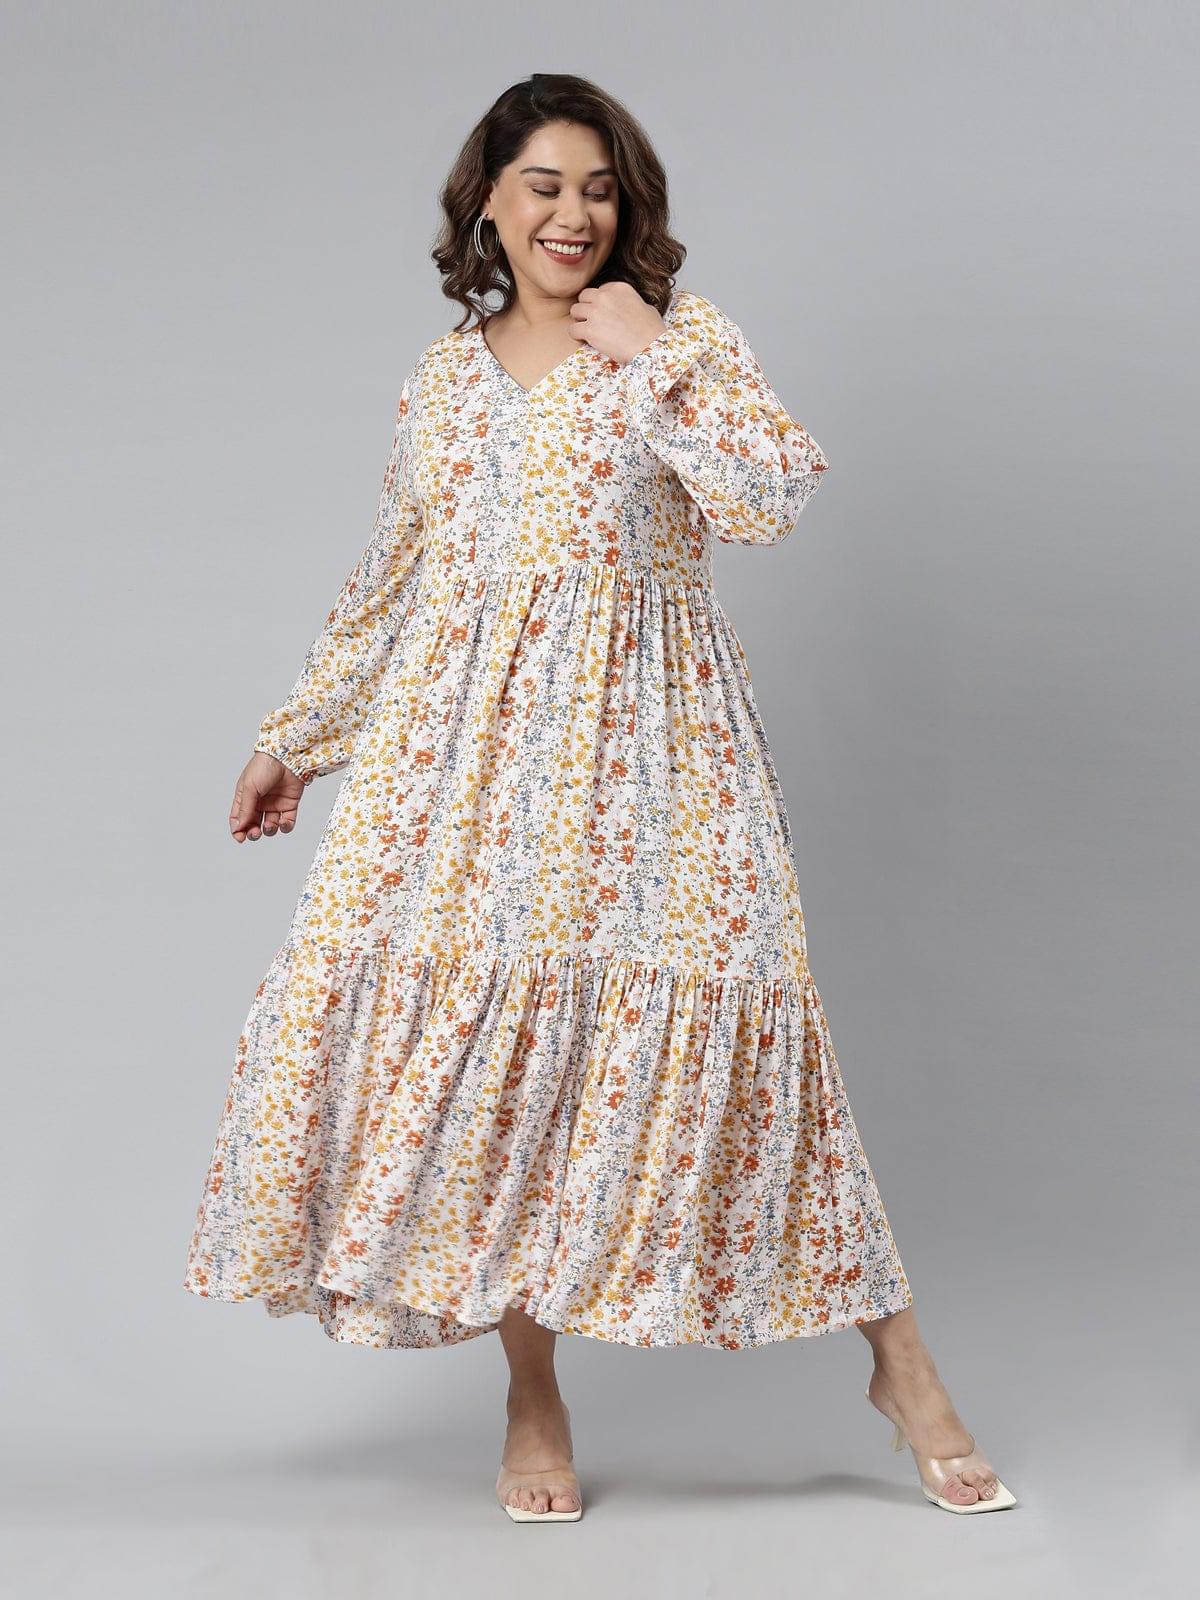 floral dress for stylish women's